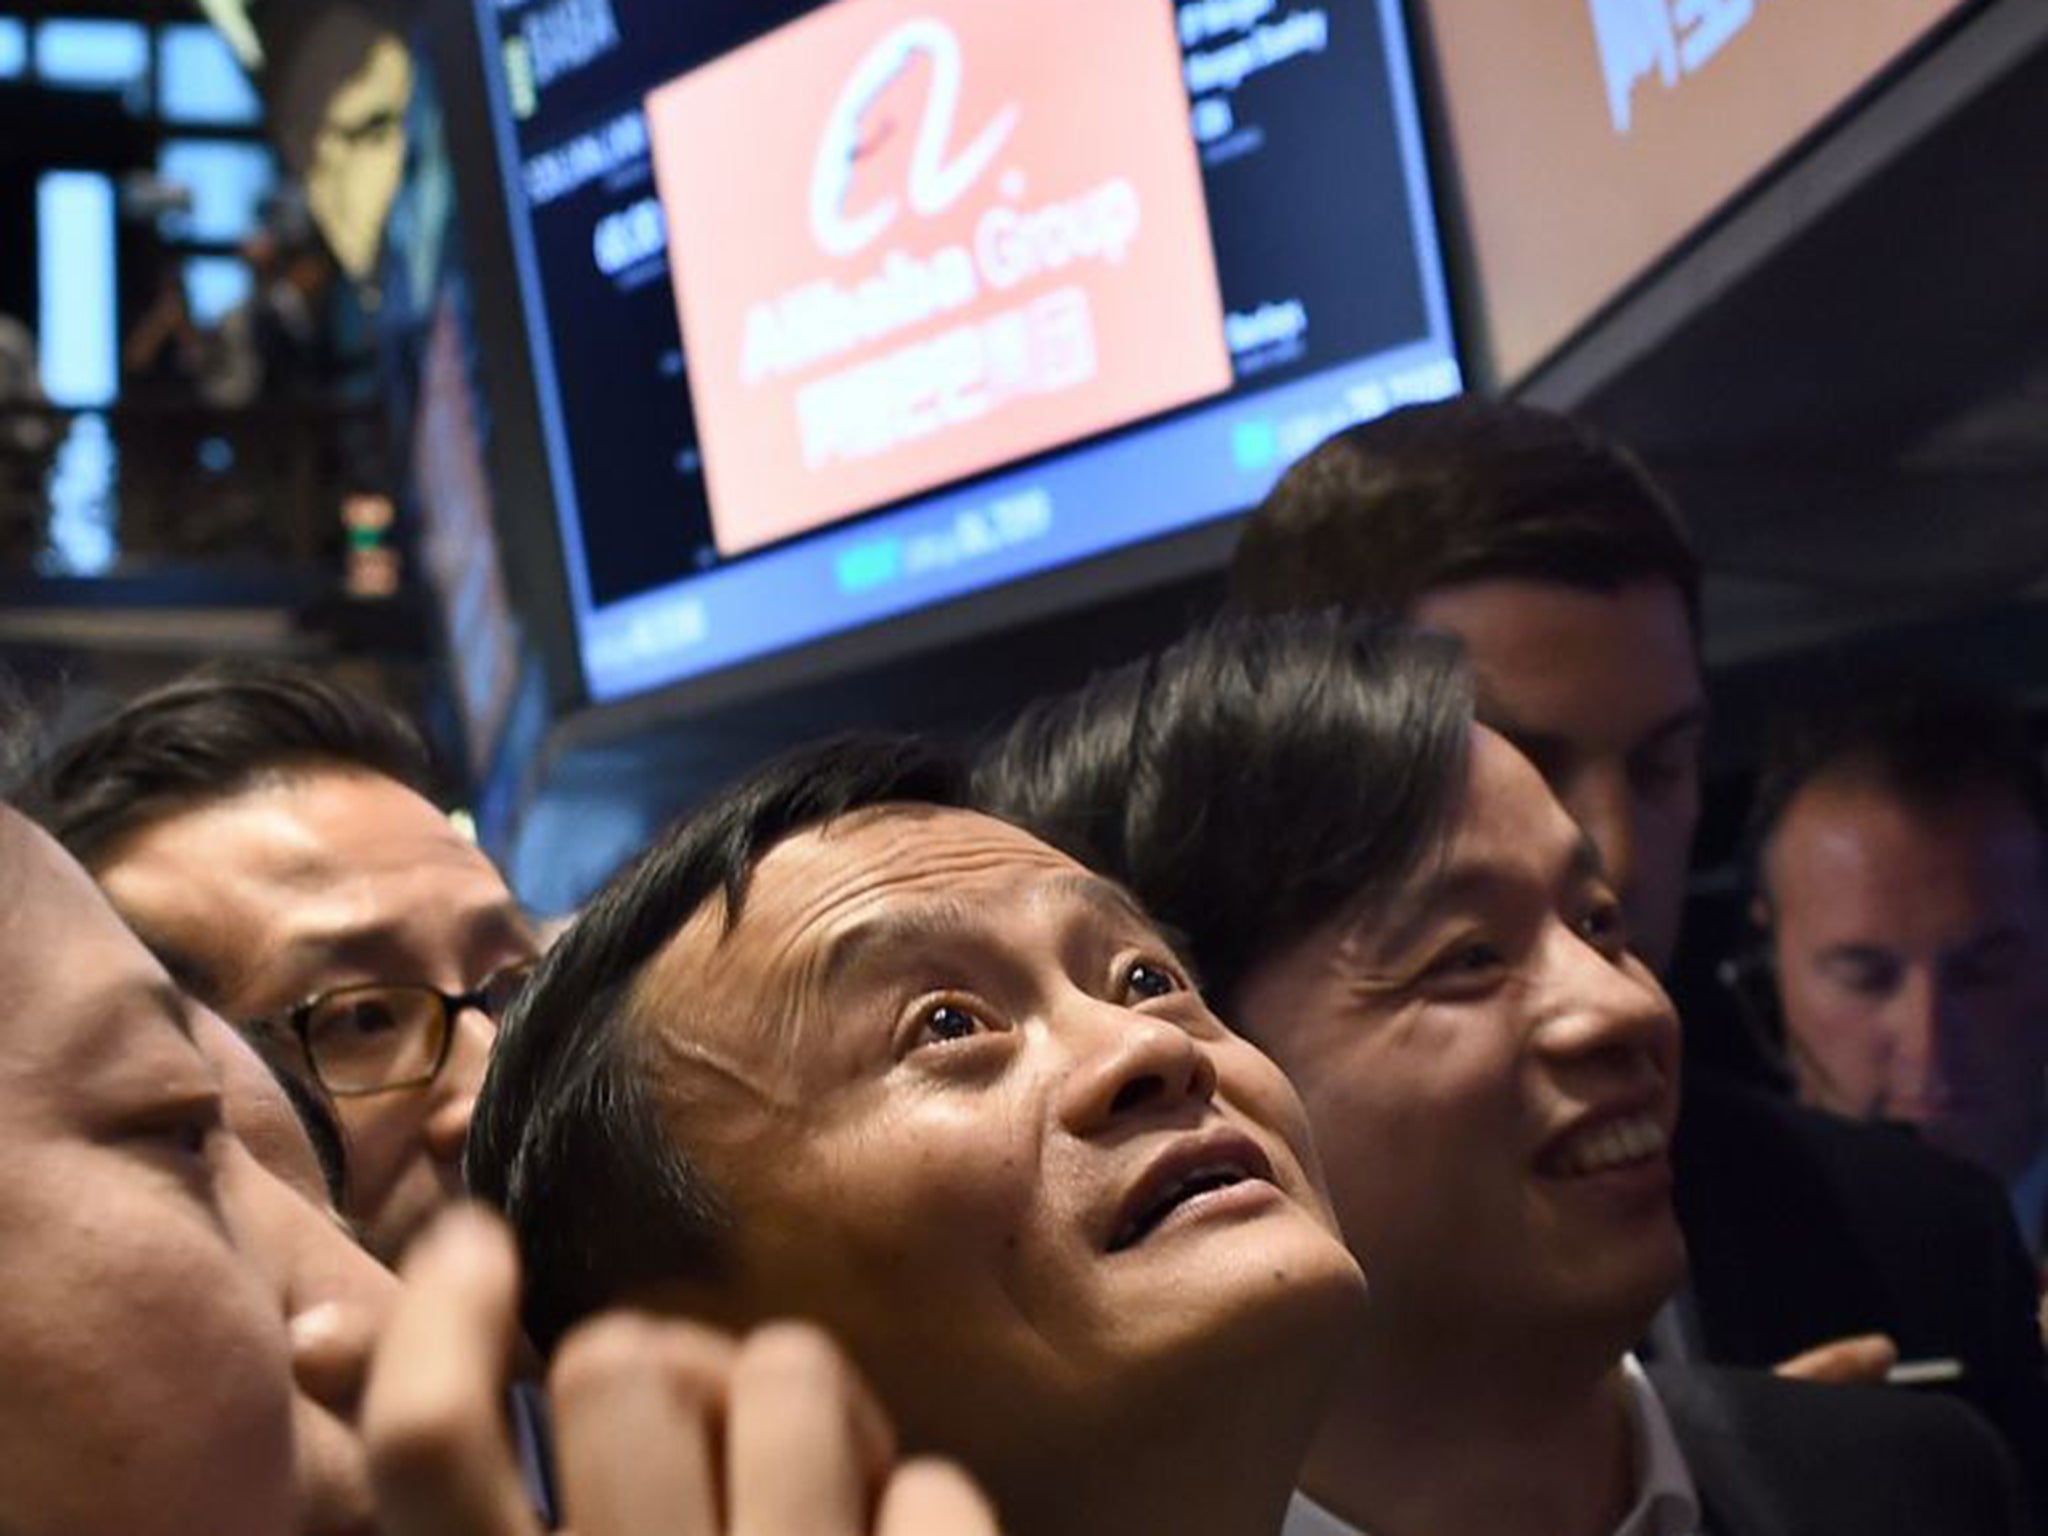 Alibaba founder Jack Ma – now the richest person in China – waits for his company’s stock to go live on the floor at the New York Stock Exchange in September